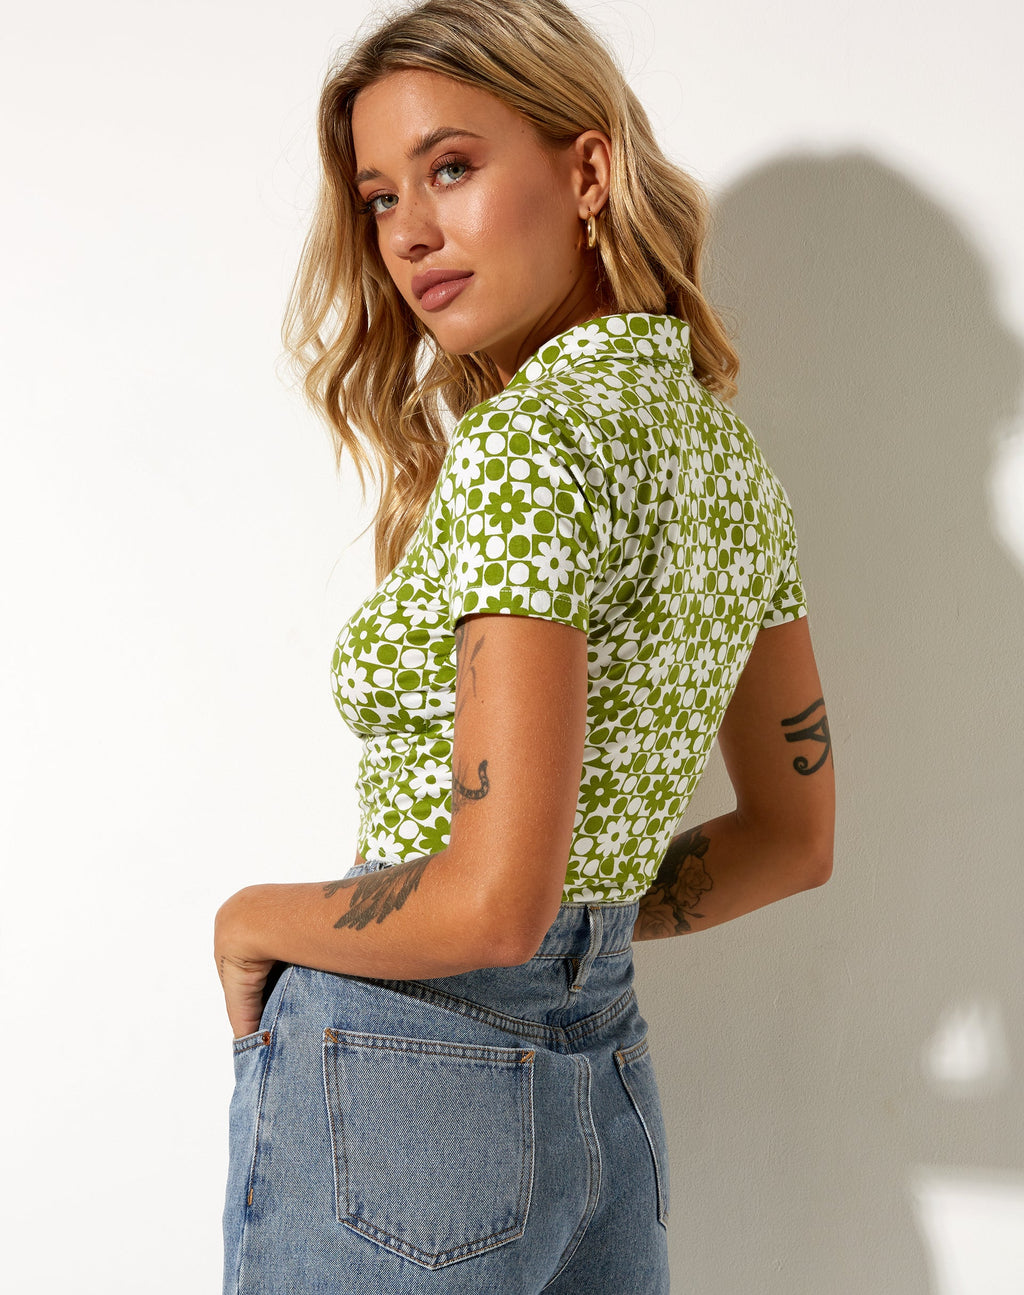 Wuma Cropped Shirt in Patchwork Daisy Green